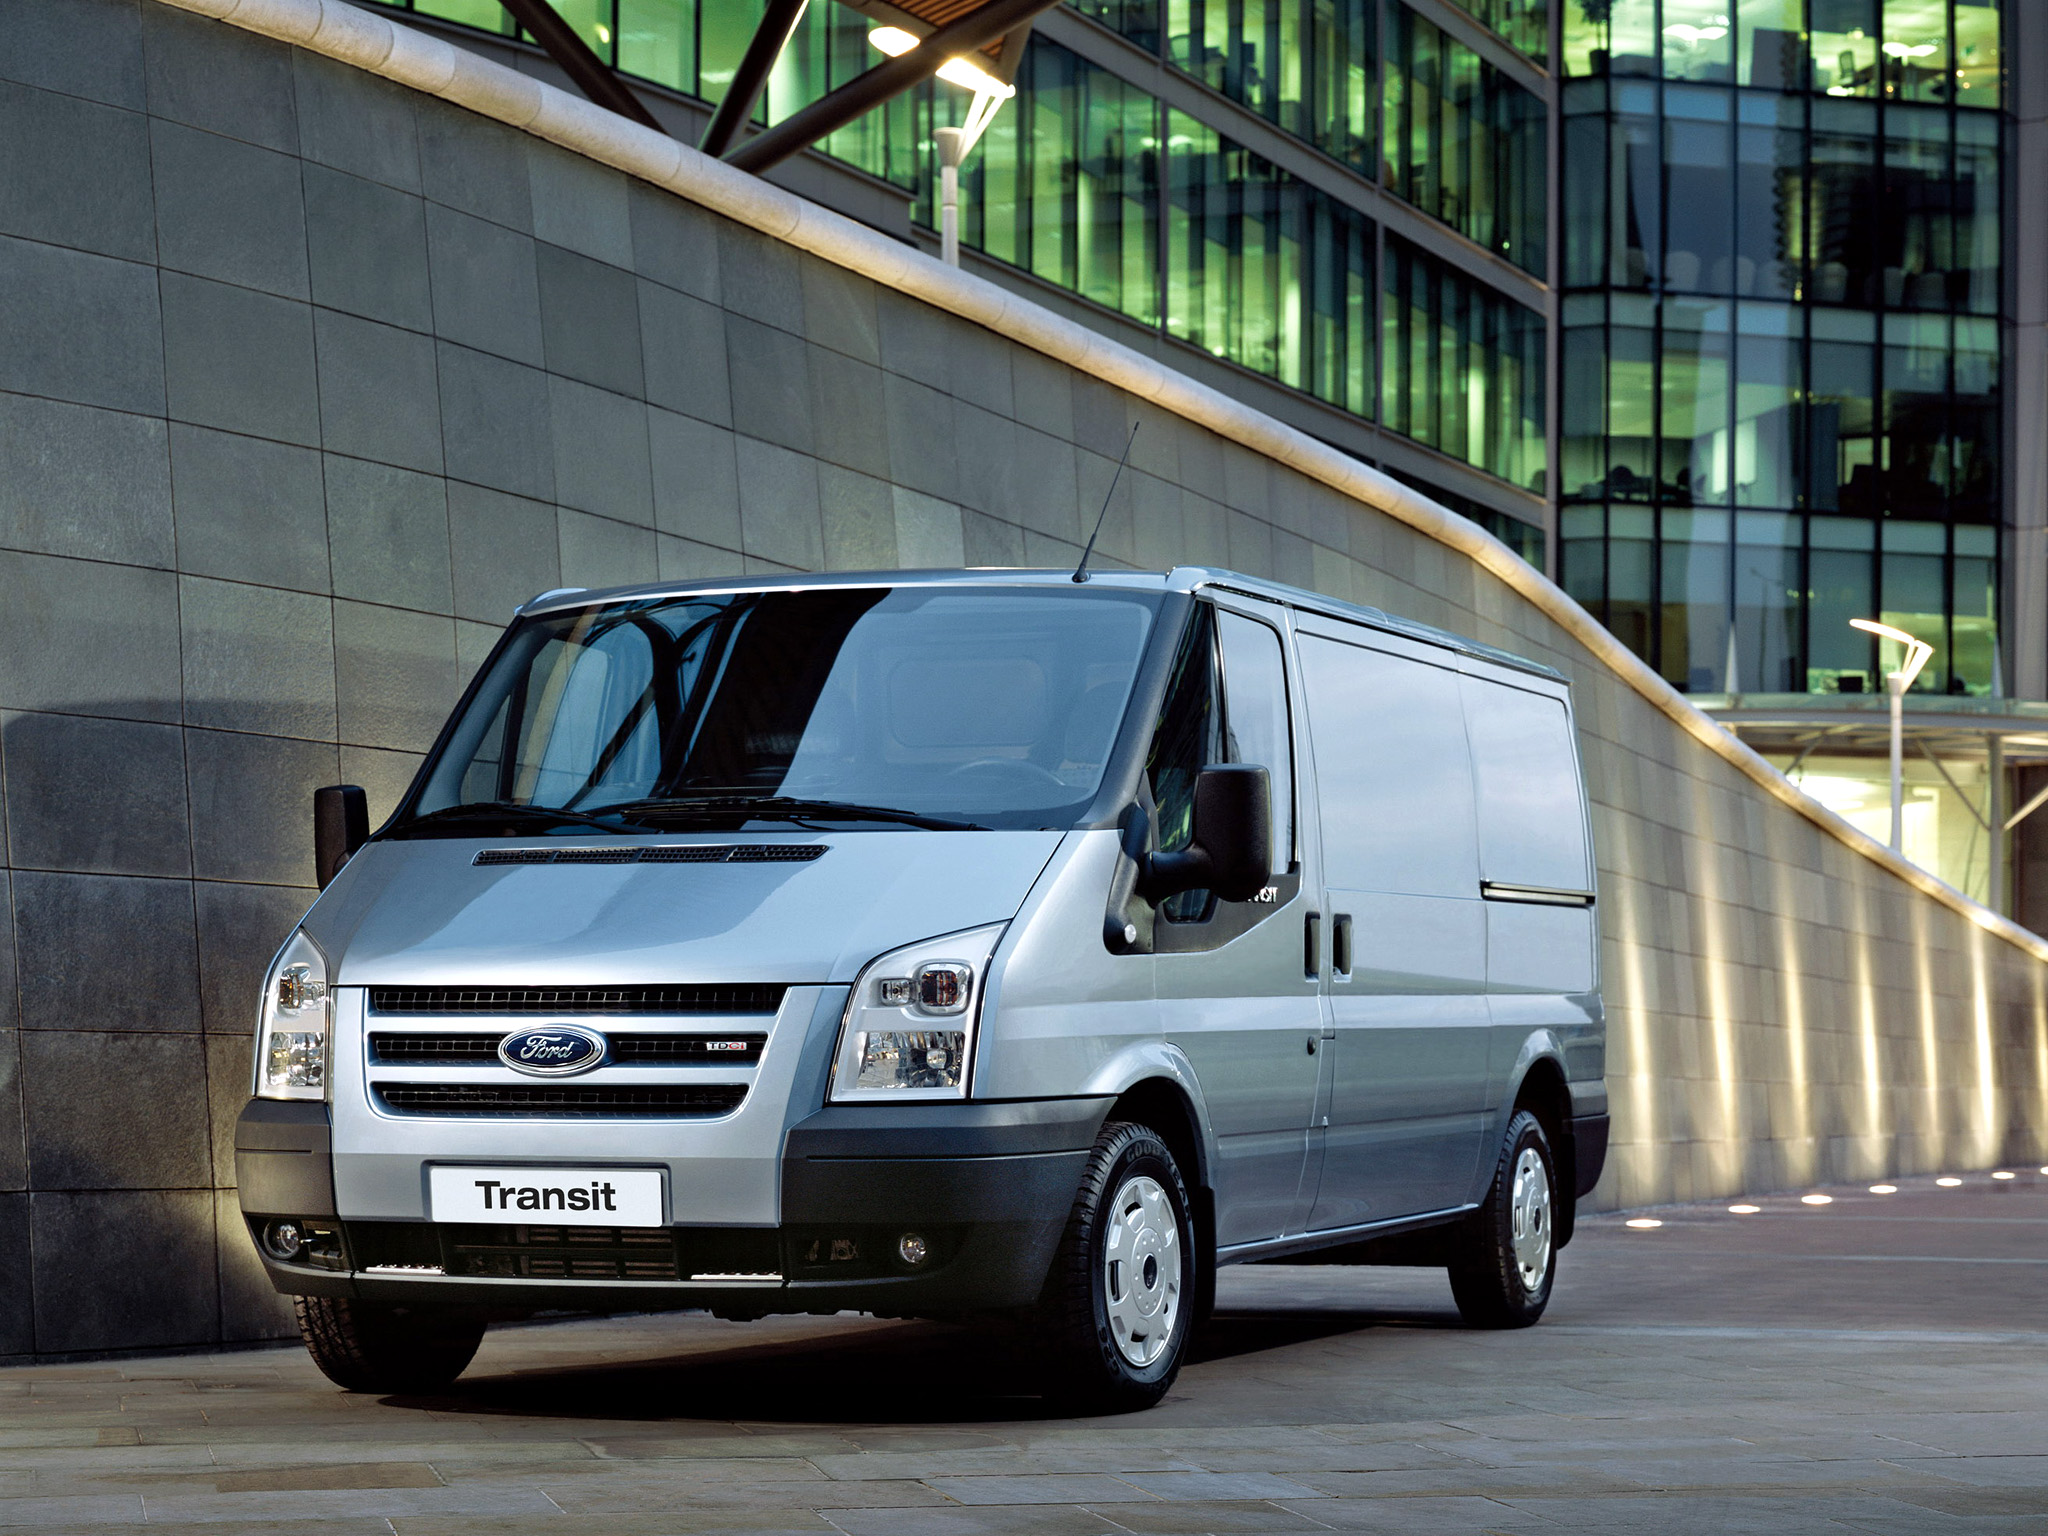 Ford Transit: A trusted commercial van in Israel